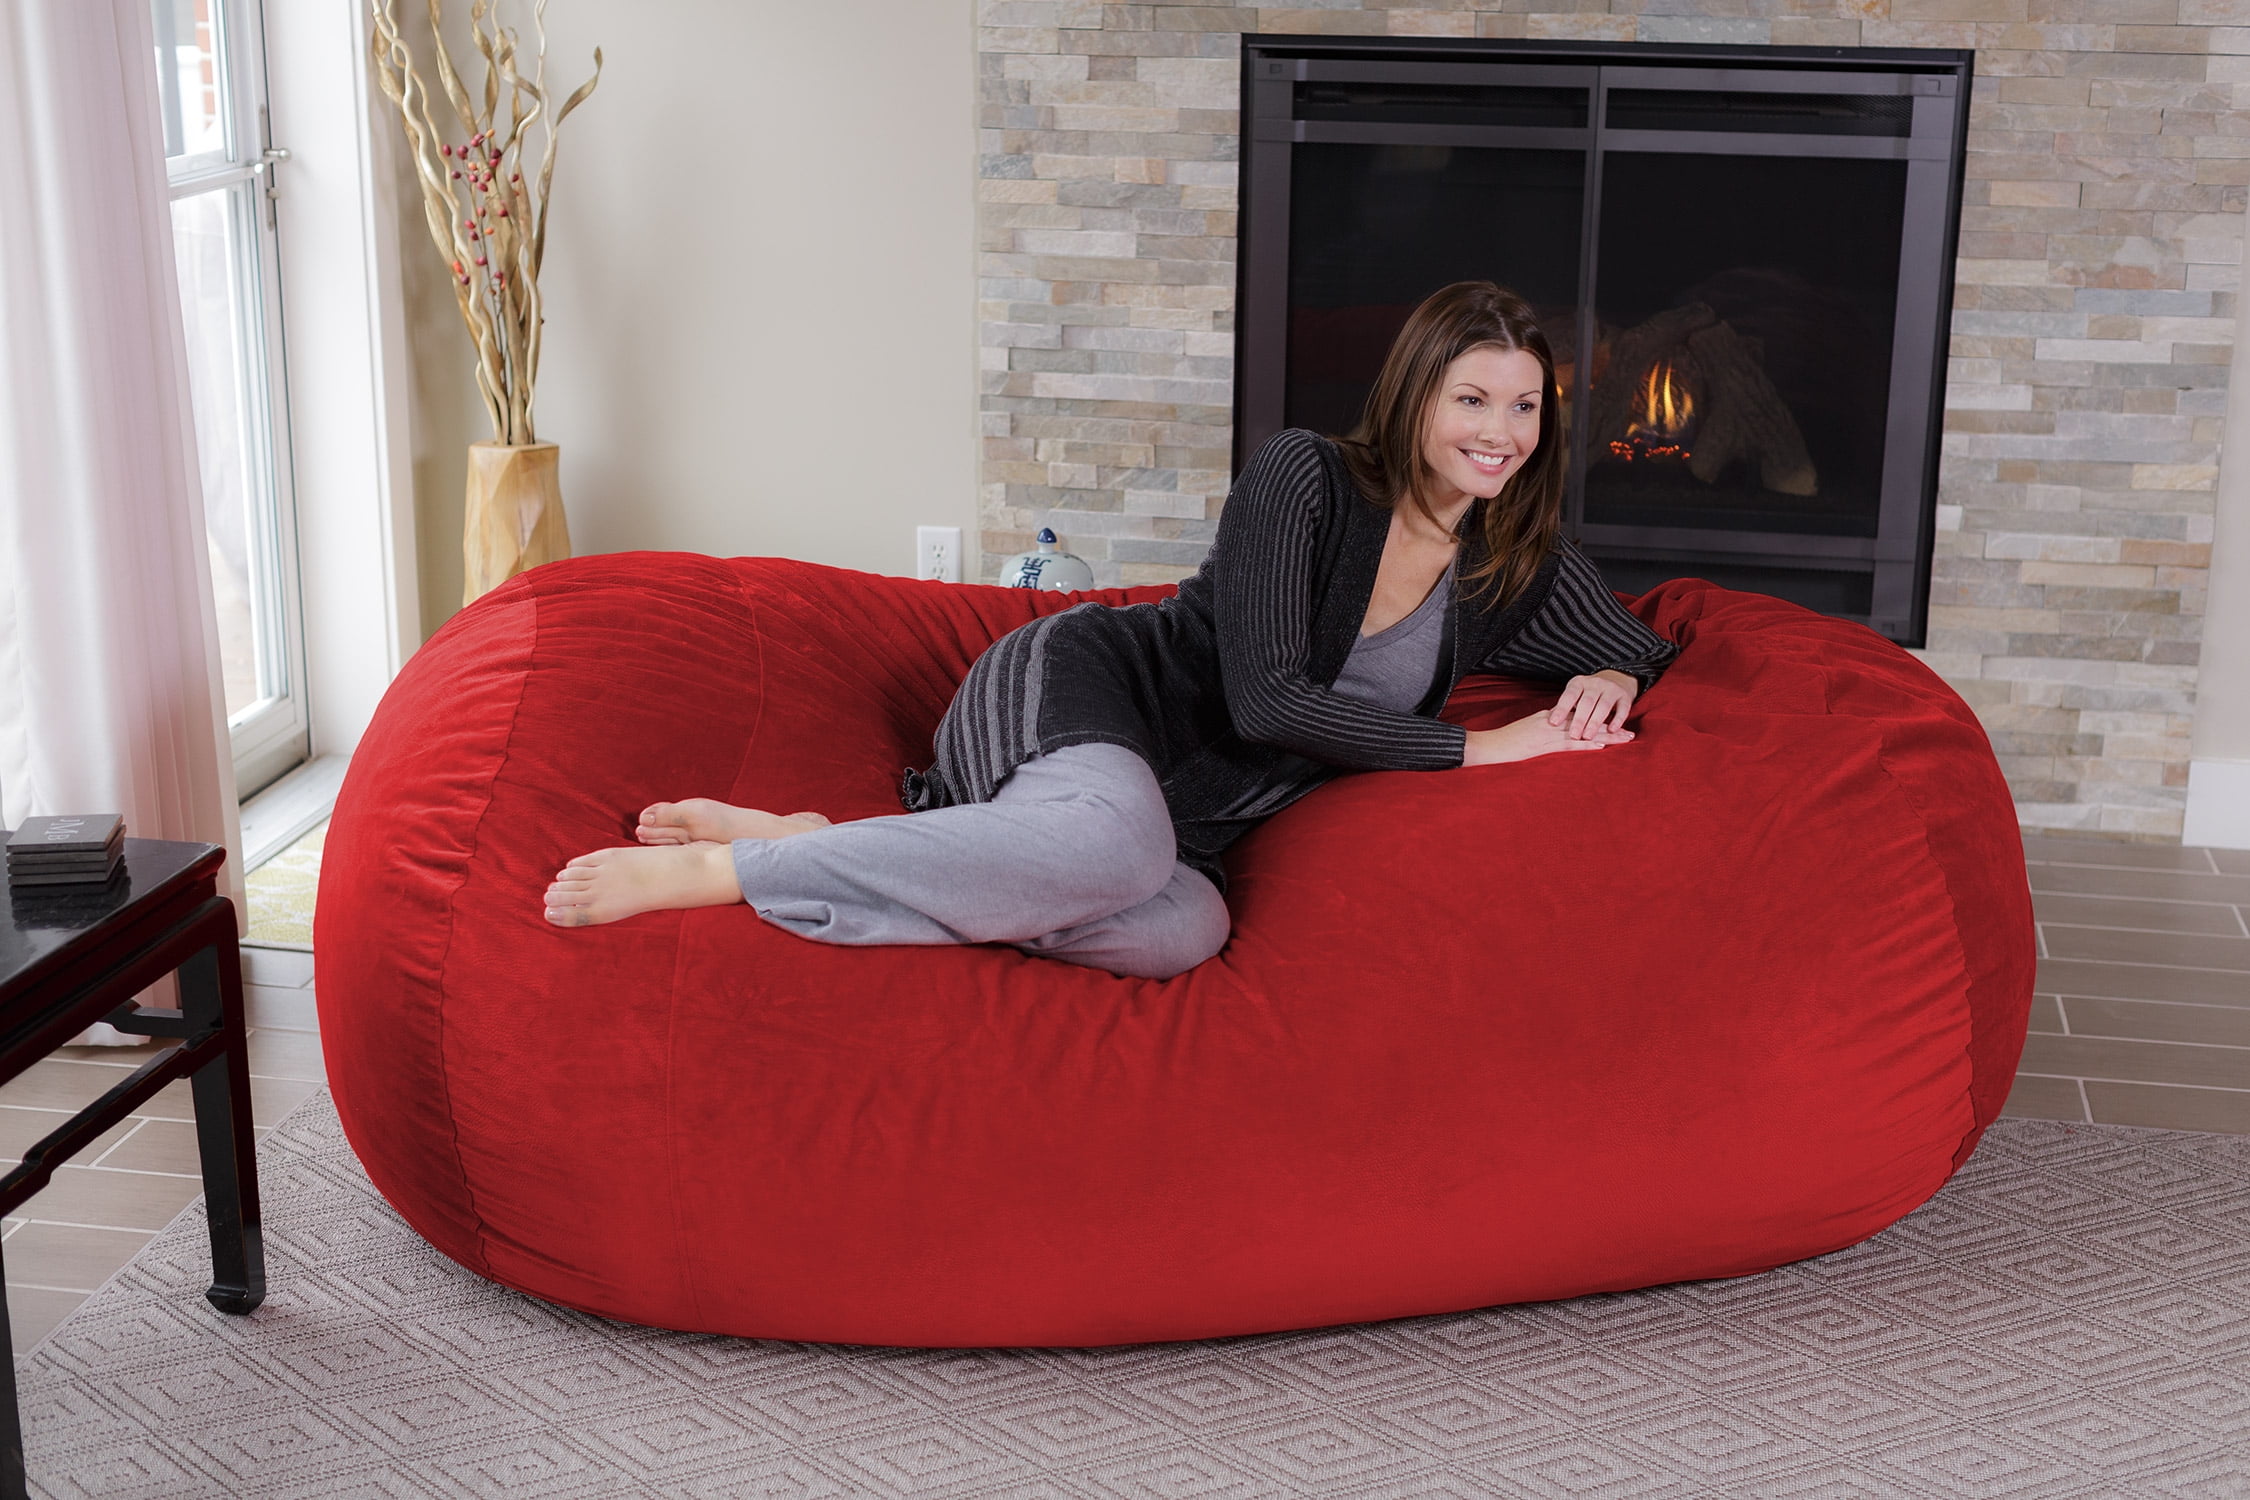 6' Large Bean Bag Lounger With Memory Foam Filling And Washable